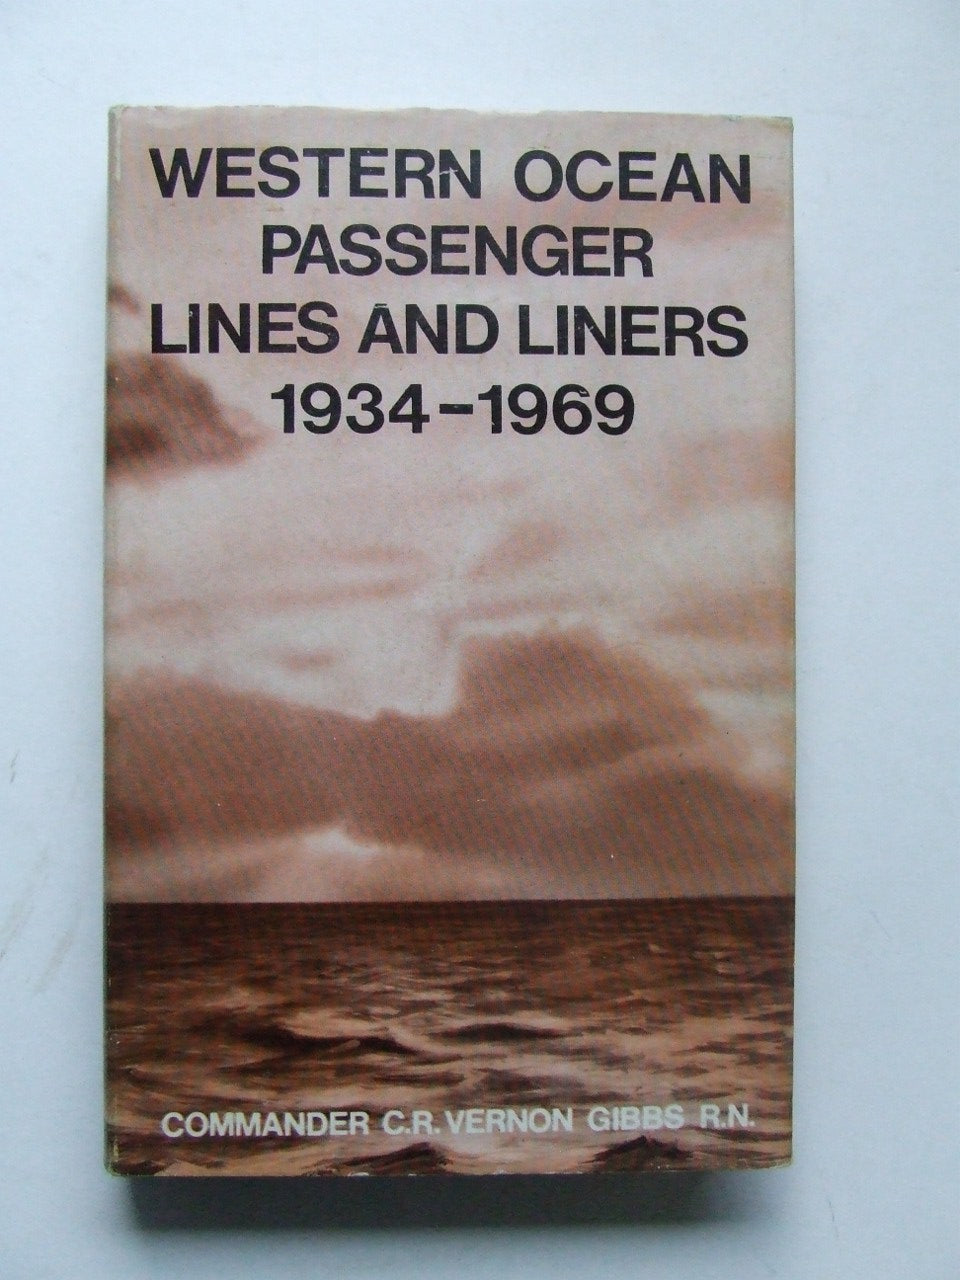 The Western Ocean Passenger Lines and Liners 1934-1969